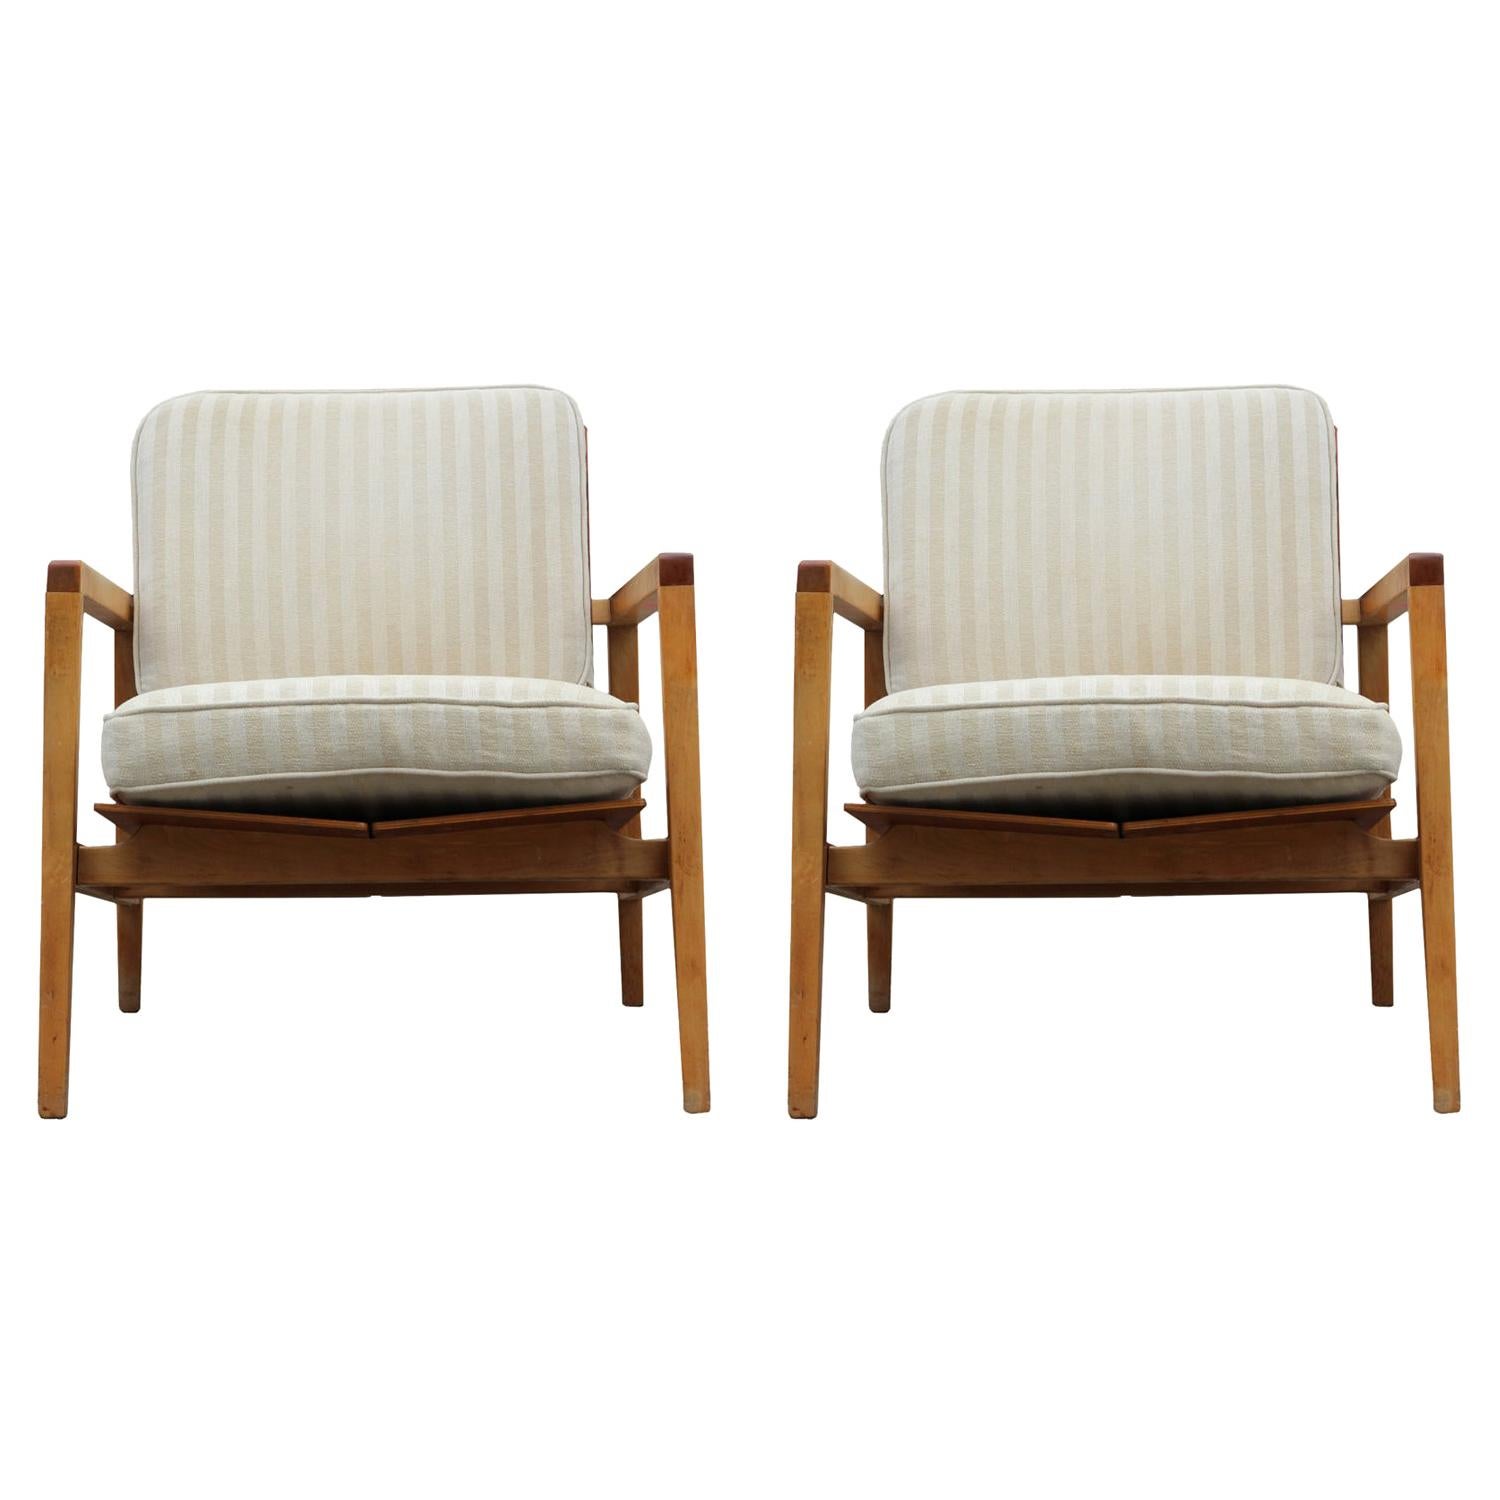 Pair of Modern Lewis Butler for Knoll Lounge Chairs Model No. 655